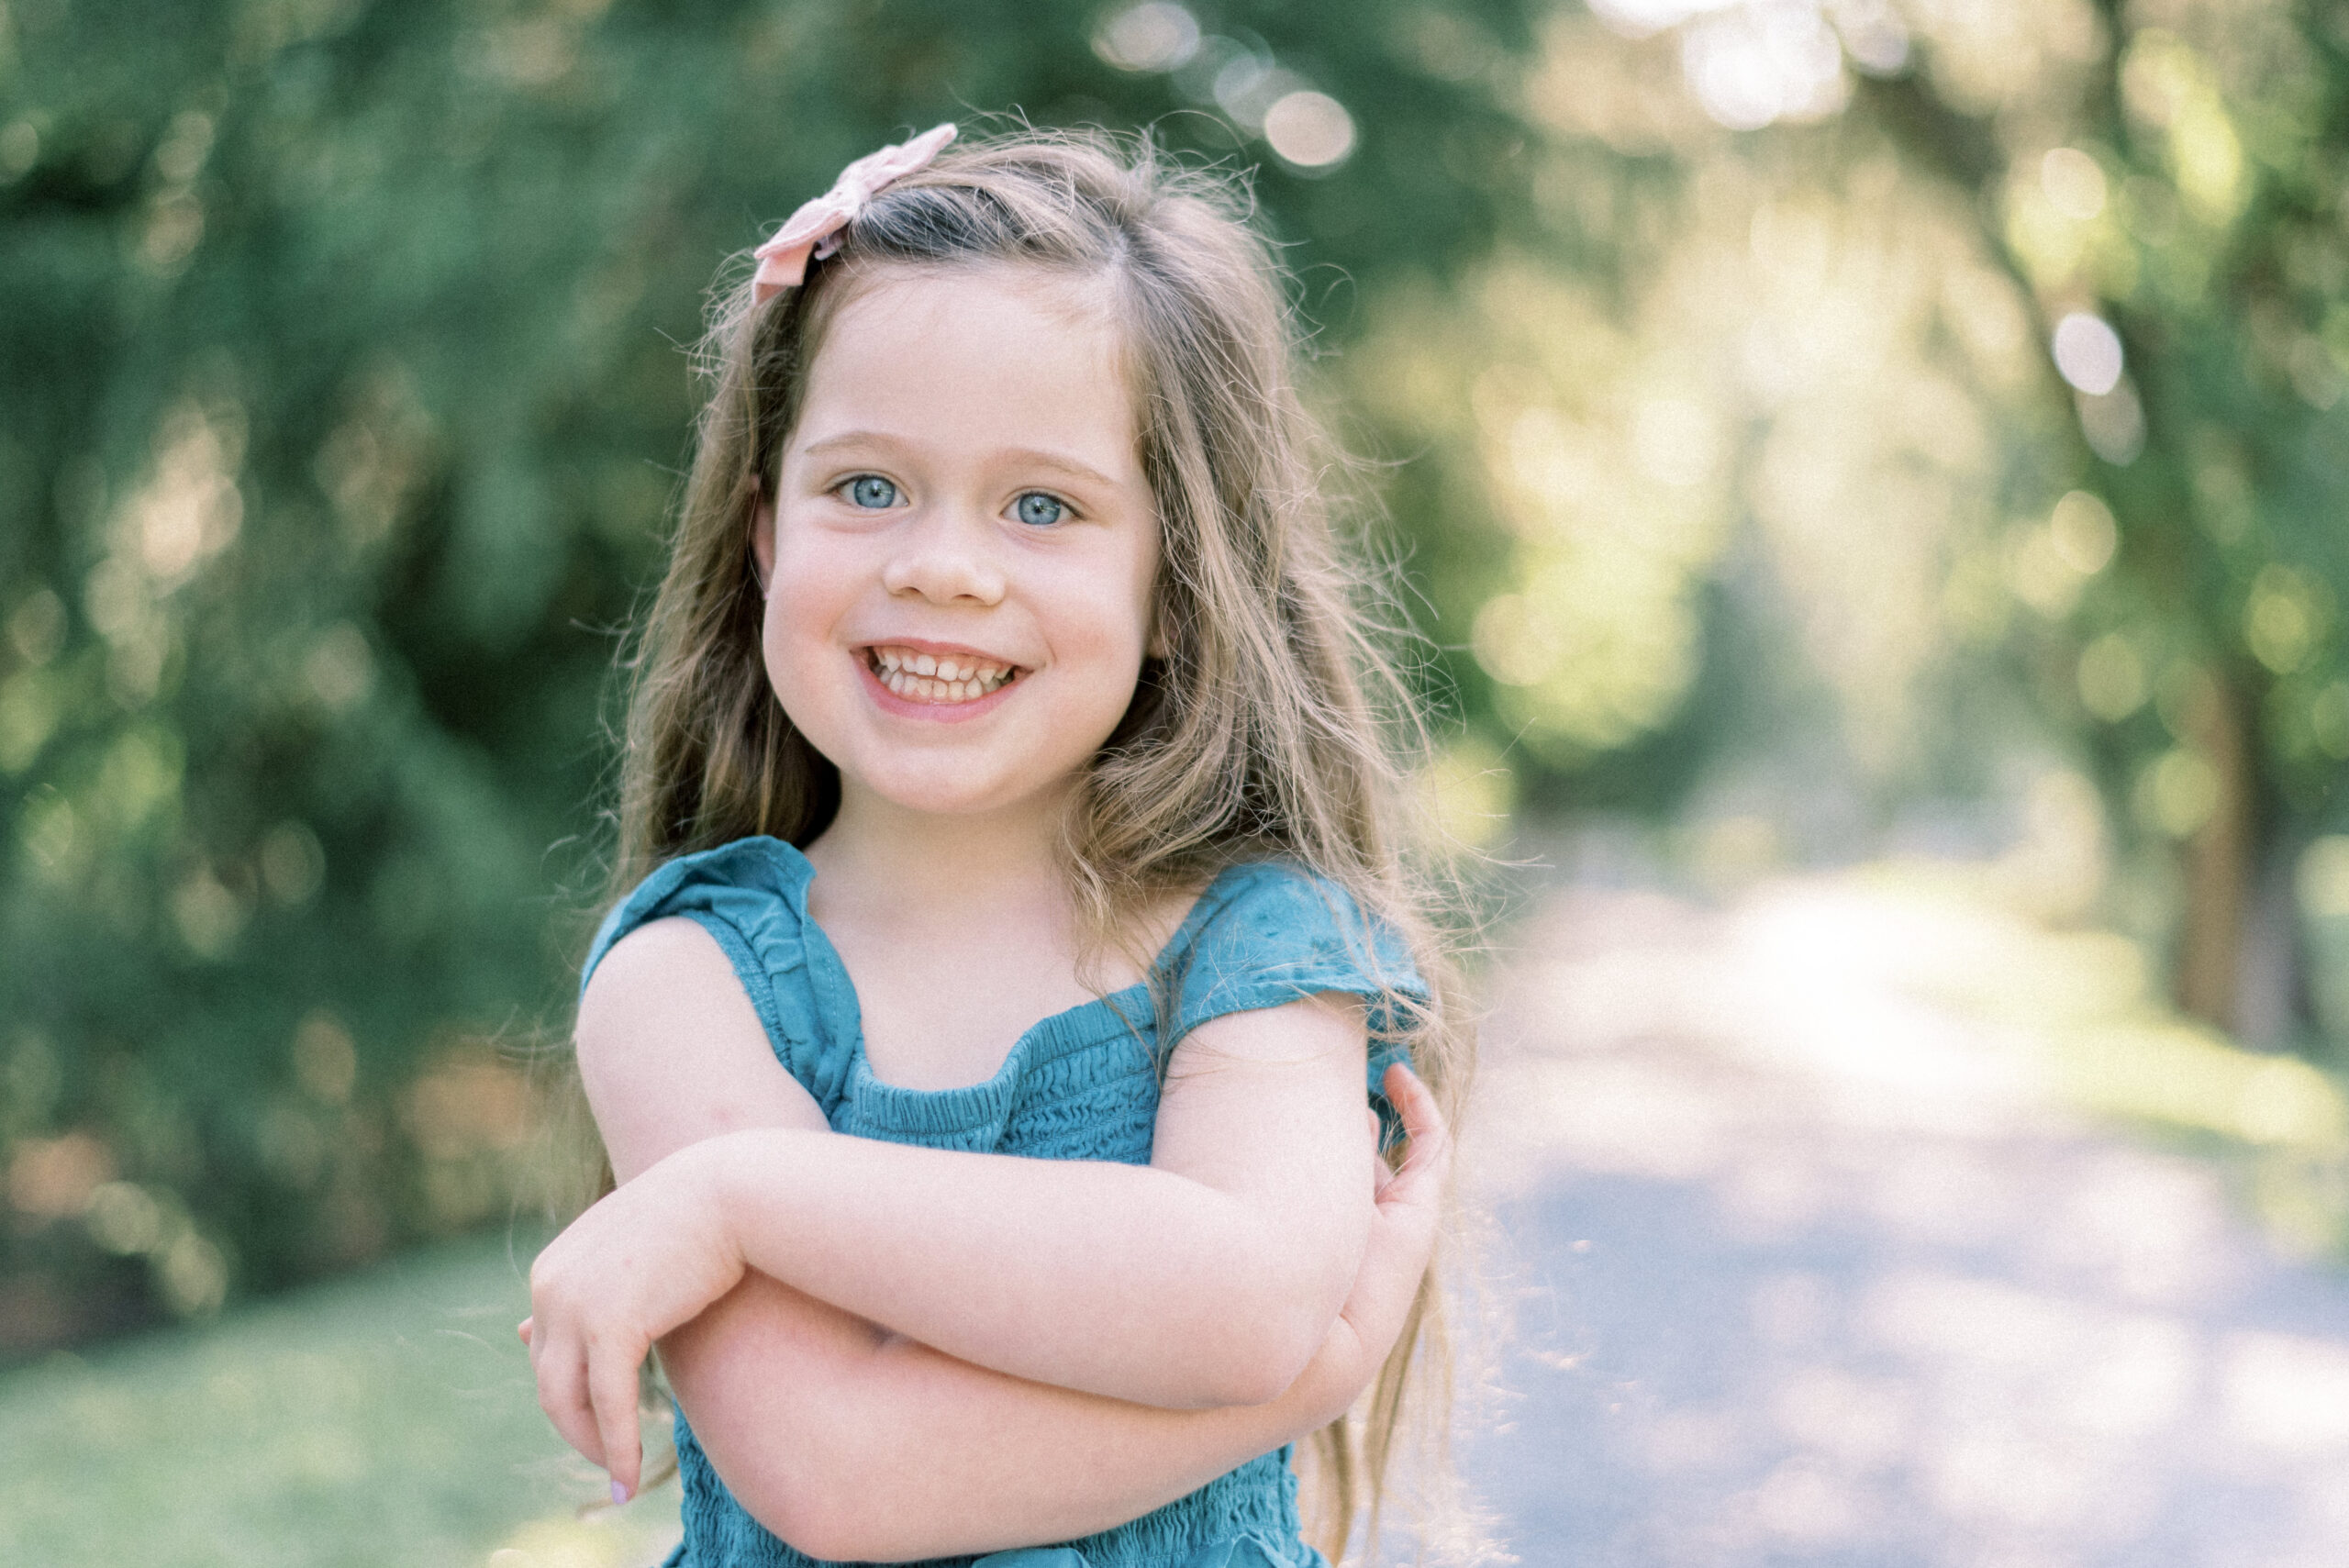 Maryland photographer captures young girl with long brunette hair smiling wearing blue dress